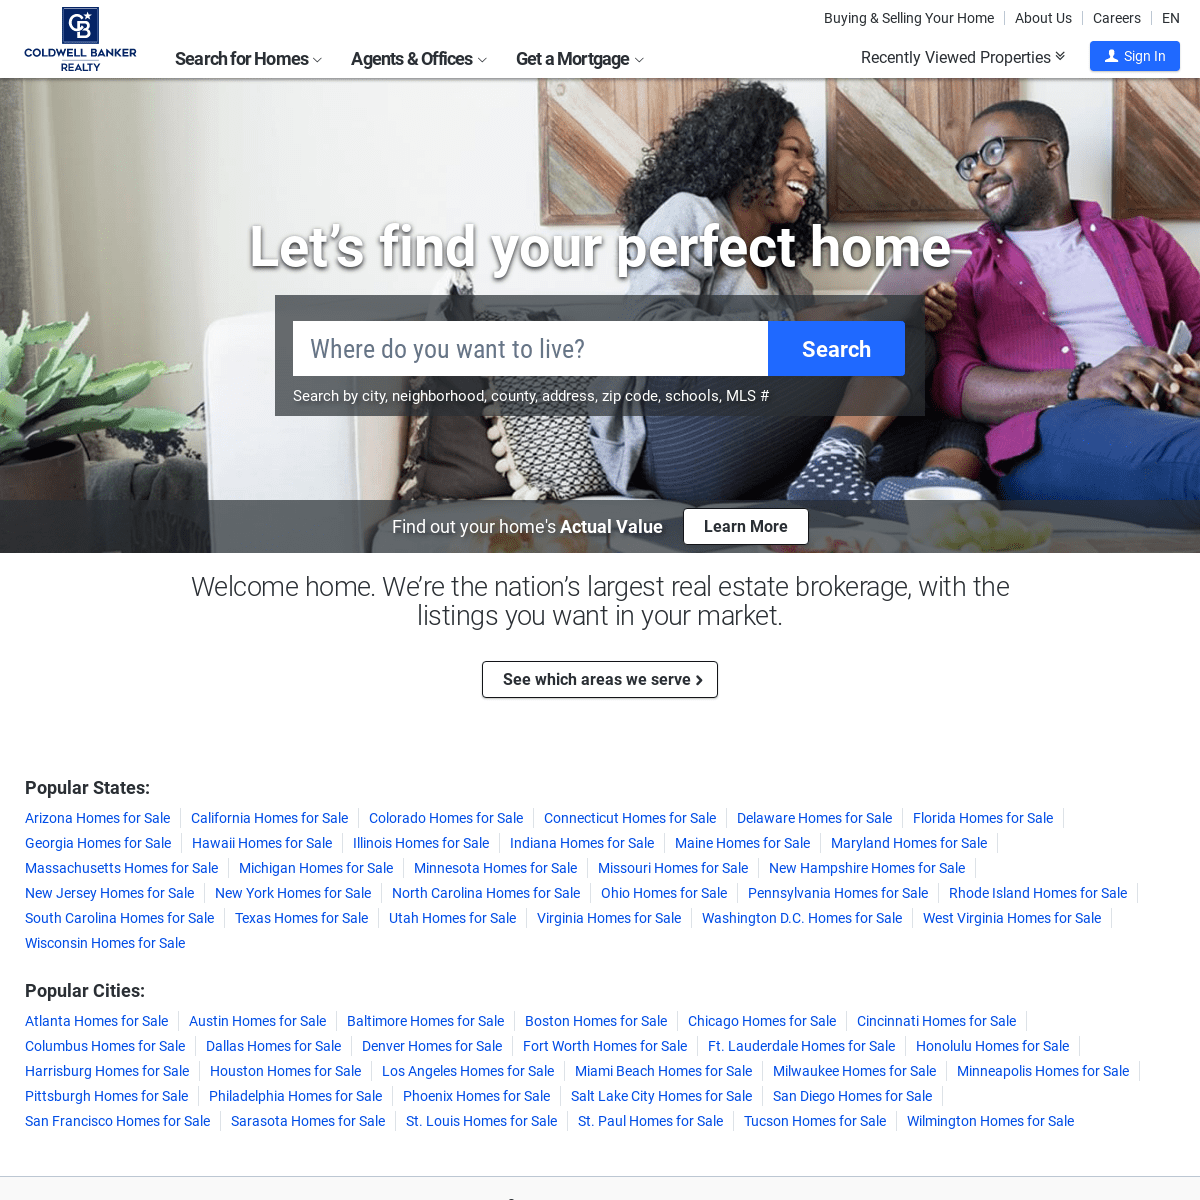 A complete backup of https://coldwellbankerhomes.com